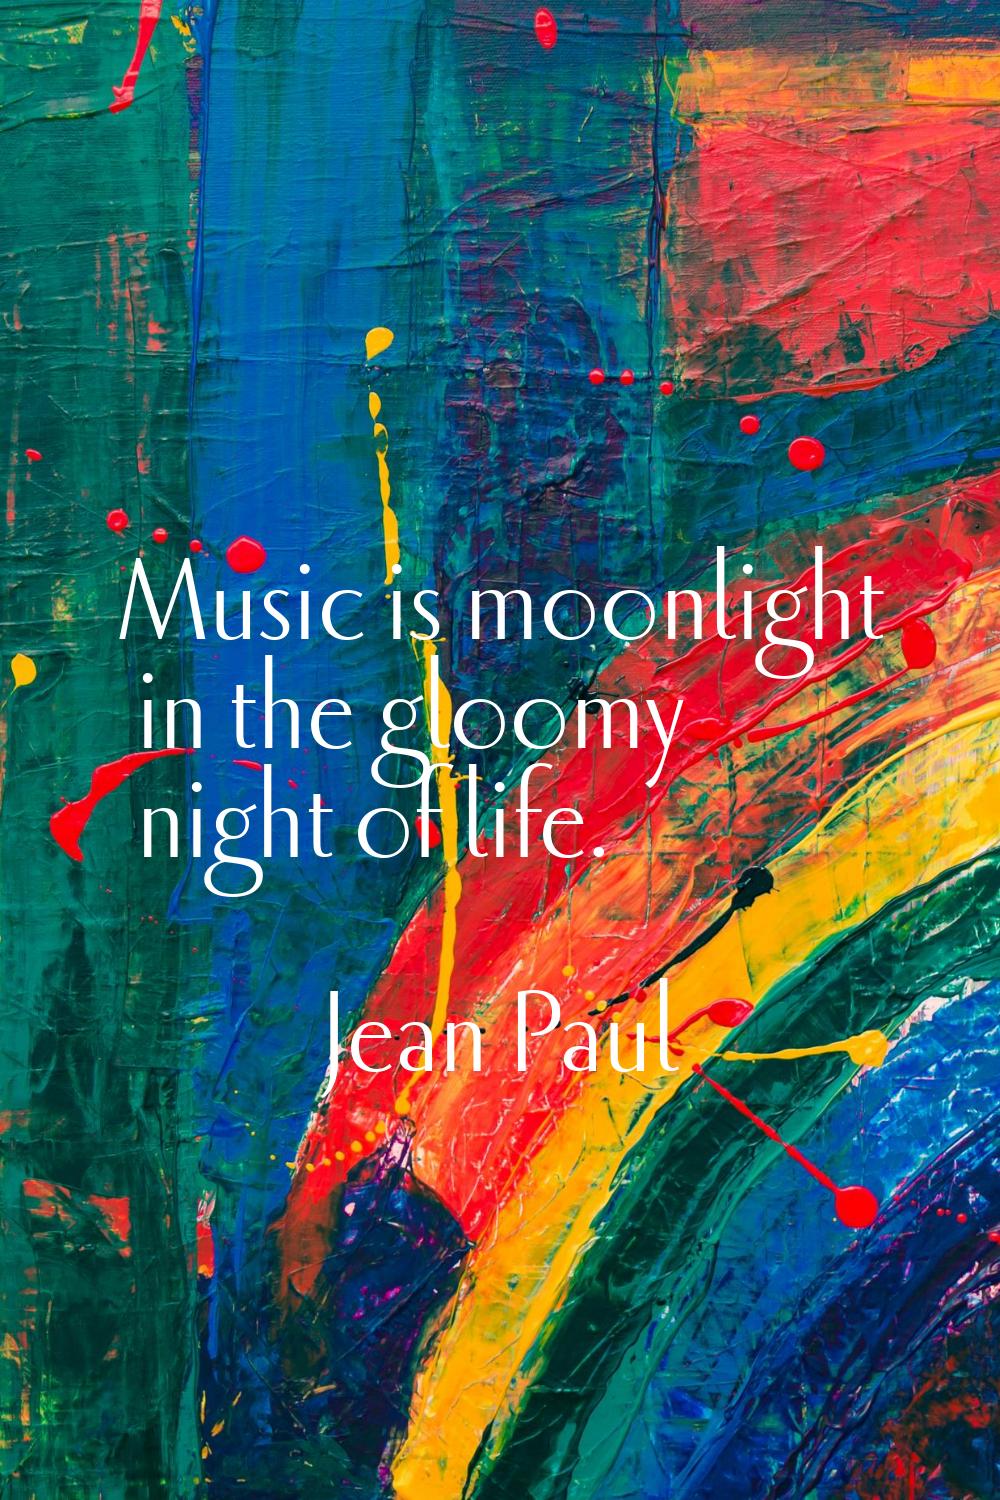 Music is moonlight in the gloomy night of life.